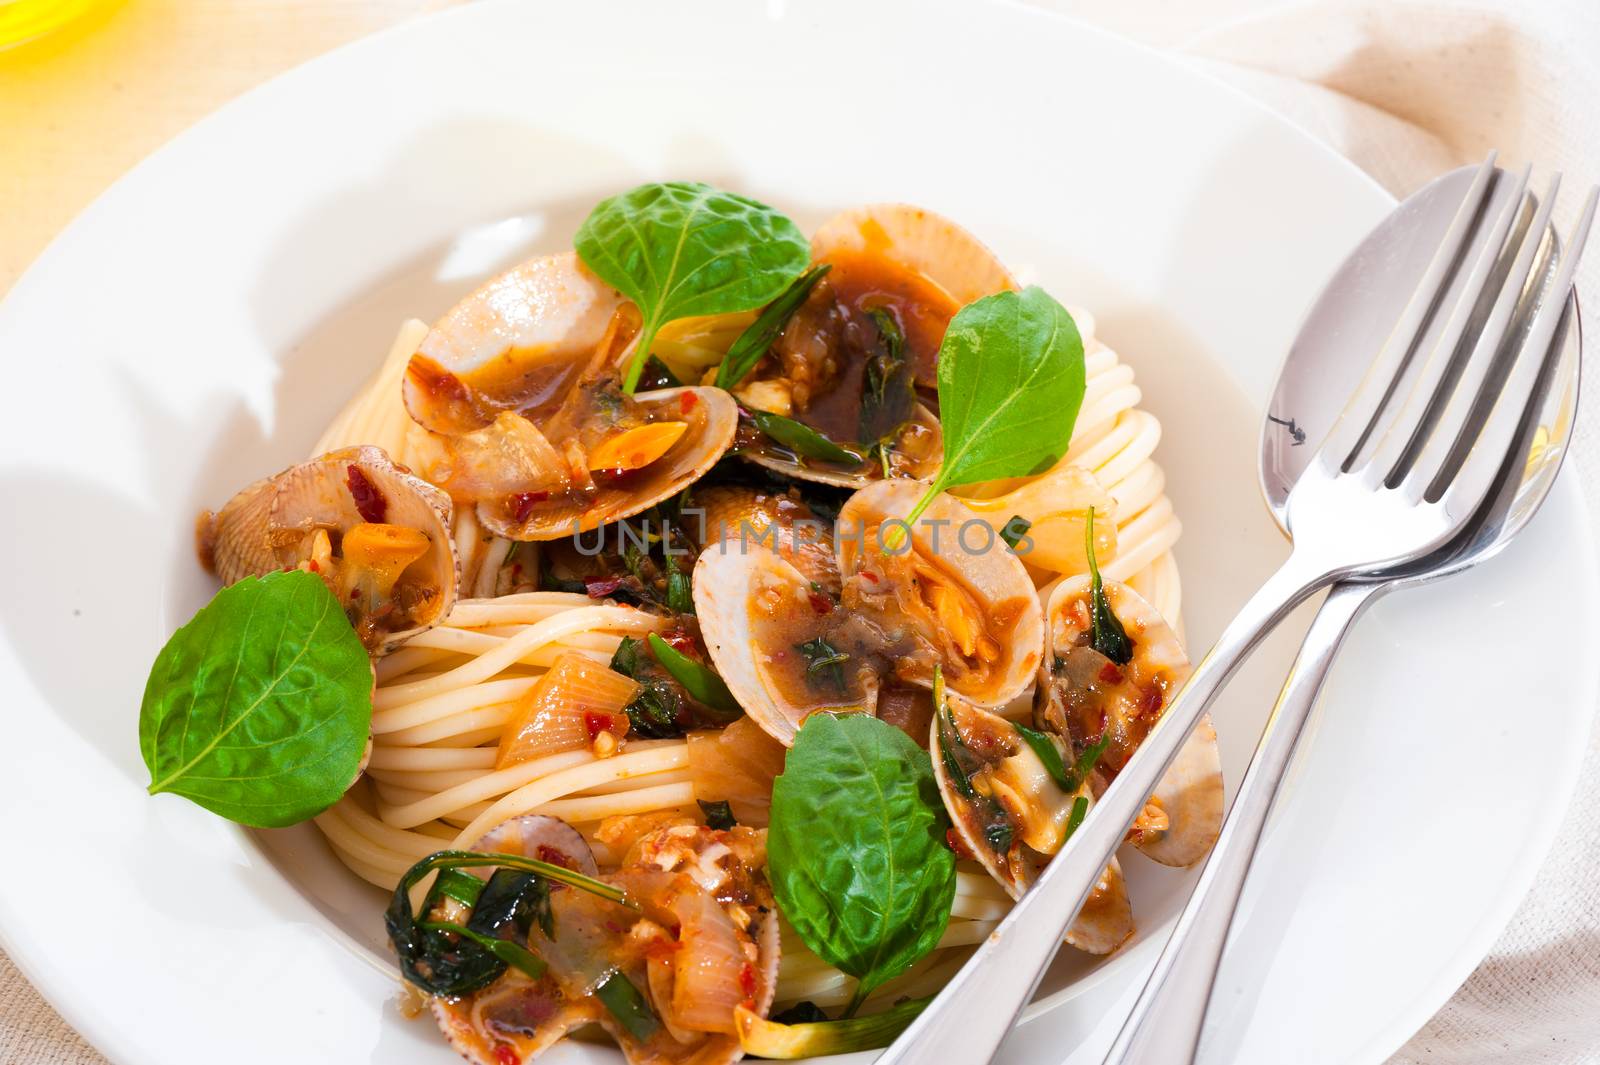 Shellfish and pastaA white plate with delicious spaghetti shellfish and green basil.